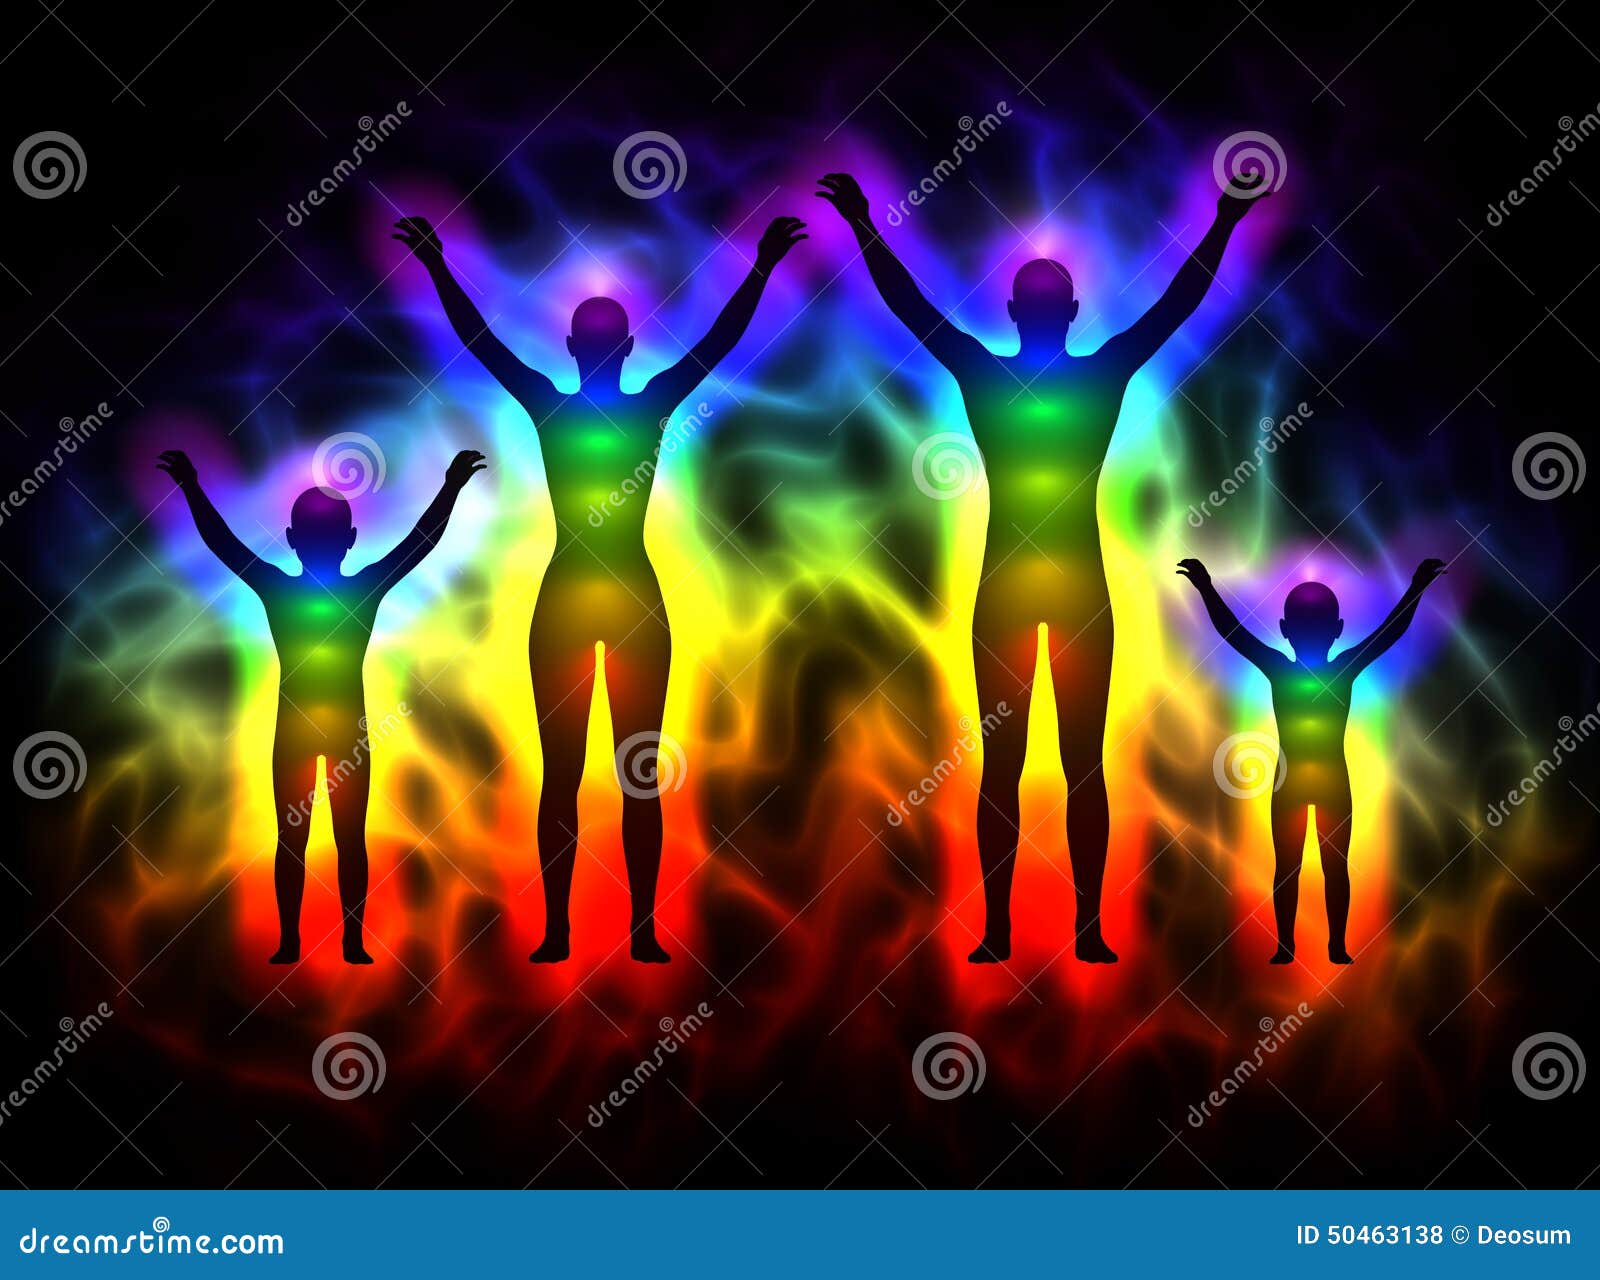 rainbow silhouette with aura and chakras - family